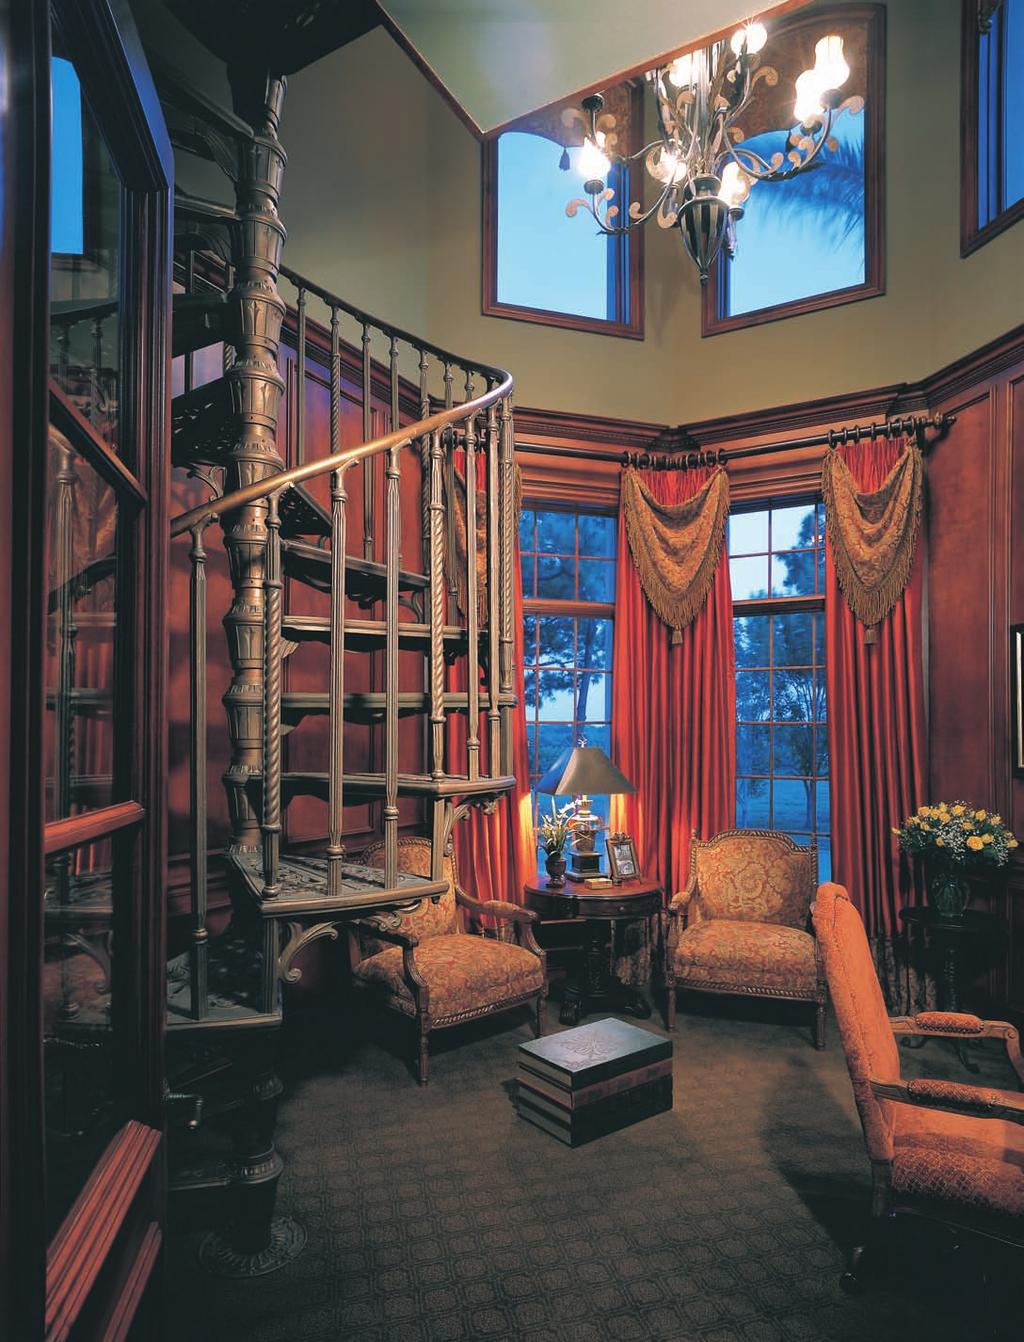 A wrought-iron spiral staircase leads from the two-story